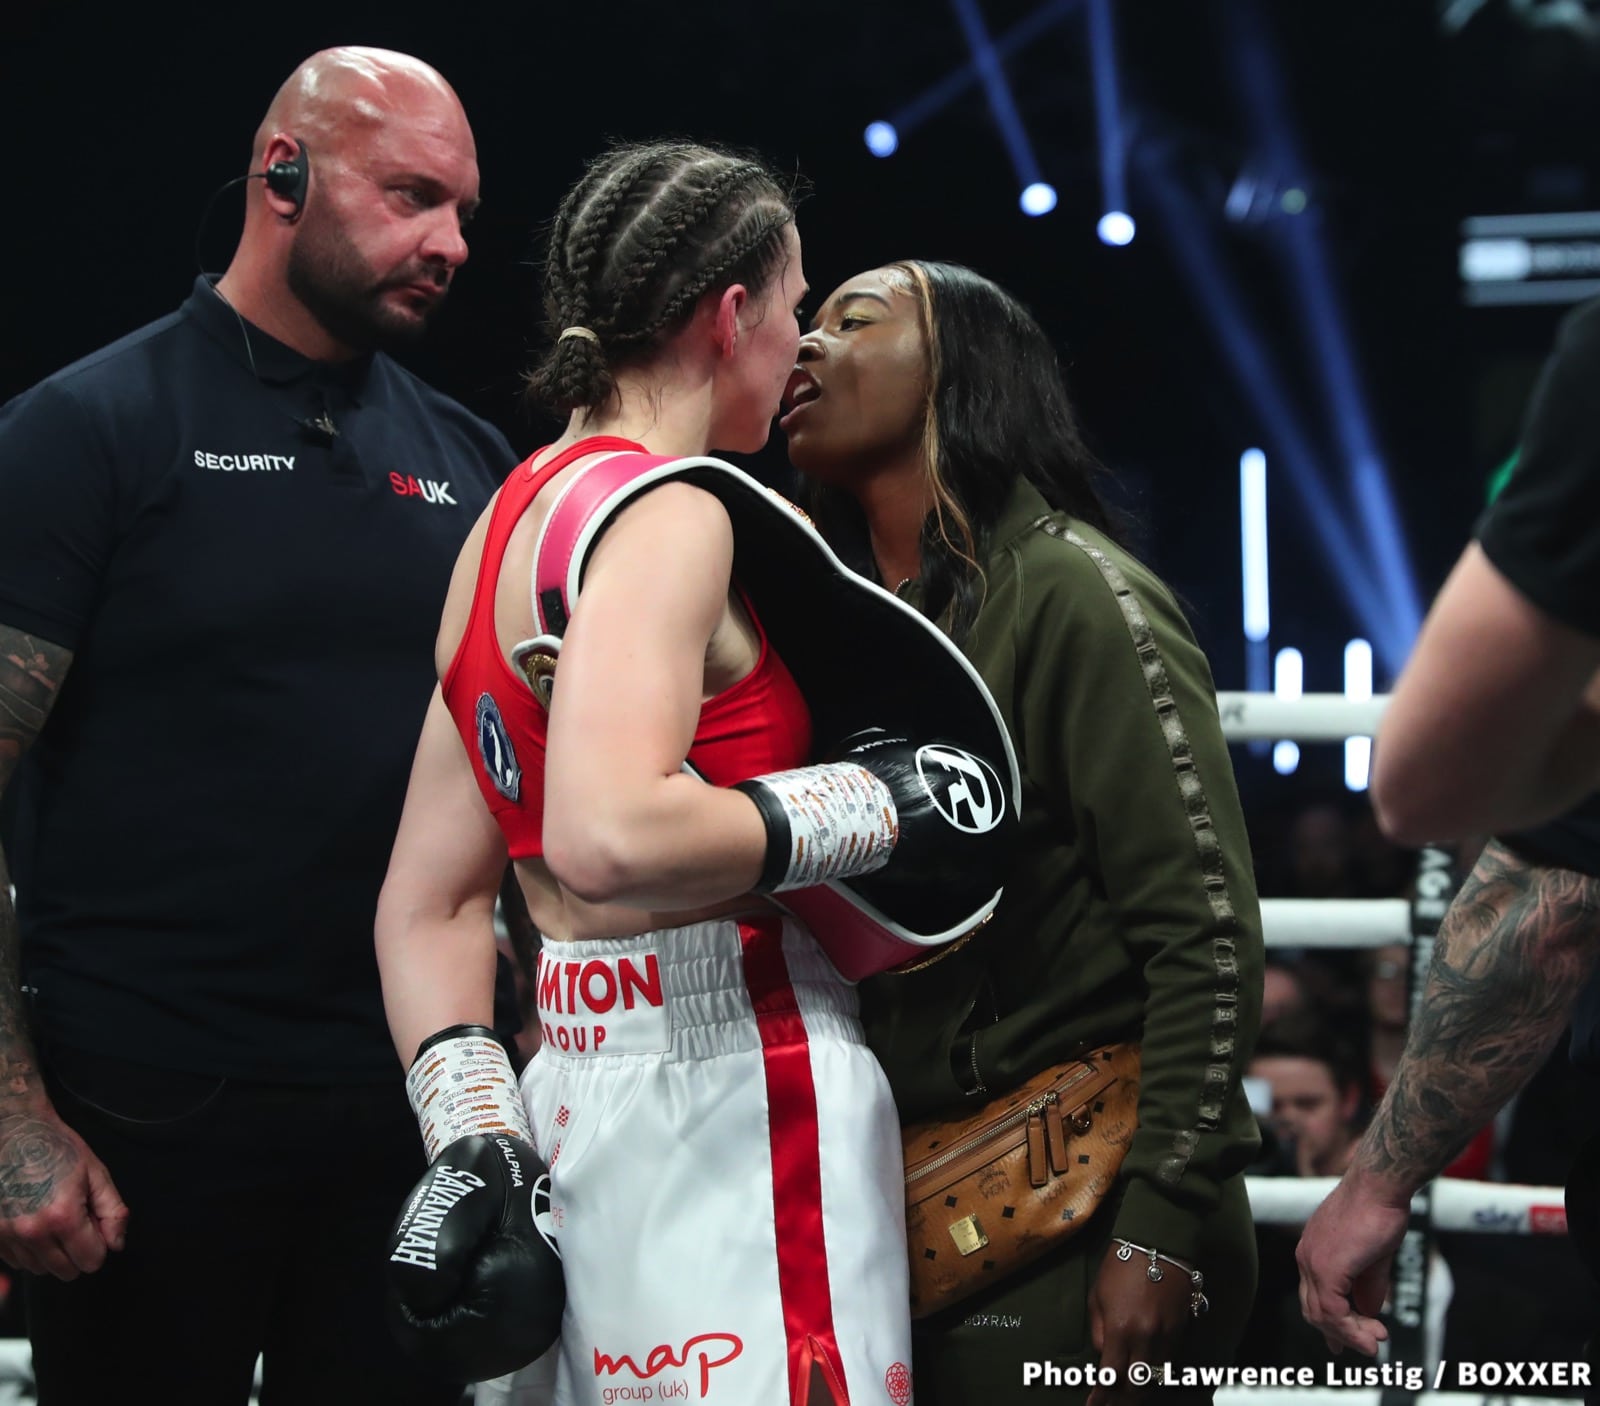 September 10 Will Be A Huge Night For Women's Boxing, As Shields vs Marshall And Mayer vs Baumgardner Will Go Down In London!